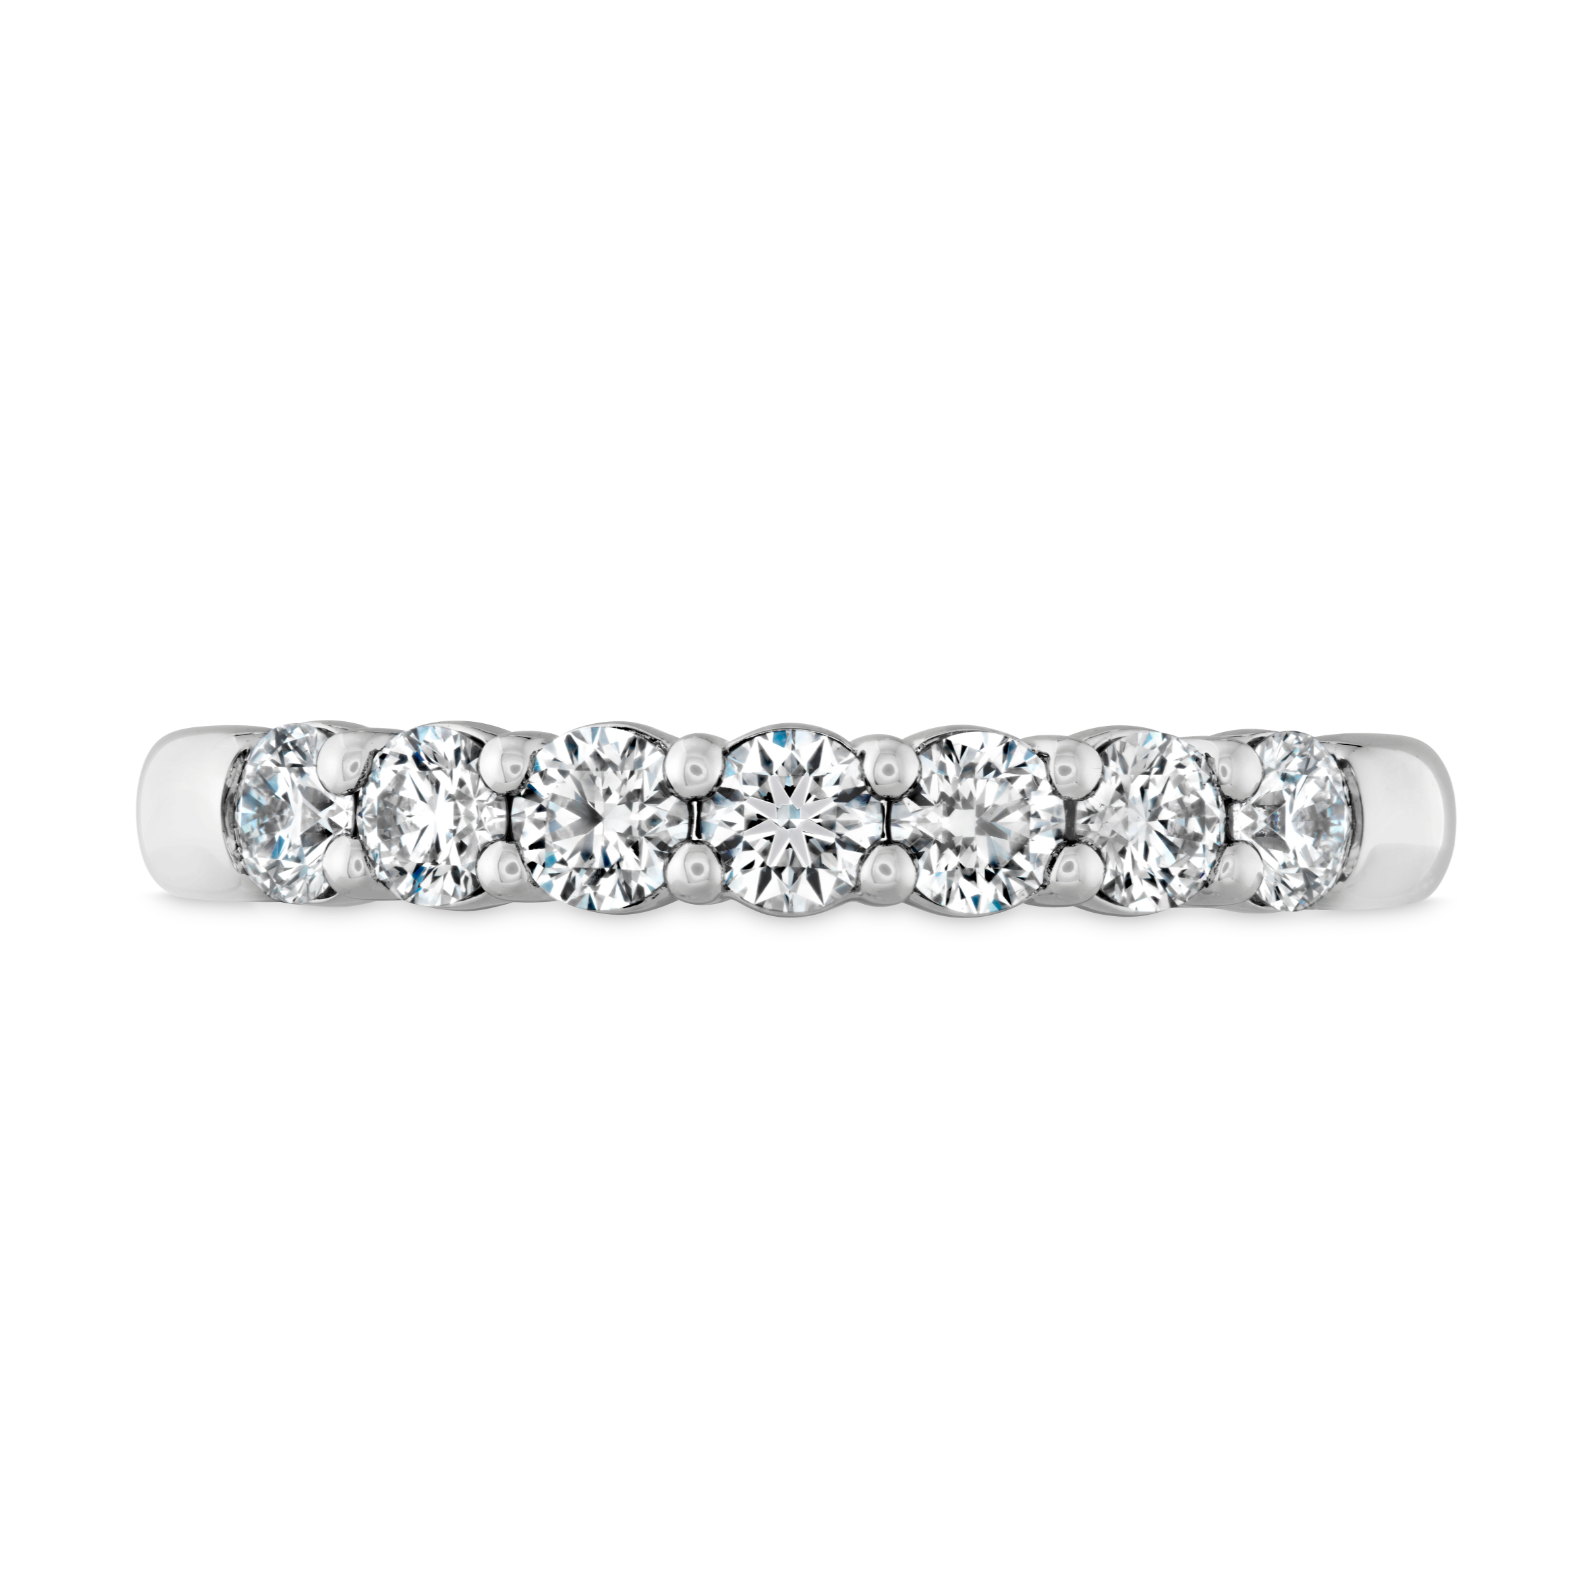 Hearts on Fire Engagement Wedding Band 18k White Gold Signature Seven Diamond Band .50 / G-H/VS-SI / 6.5